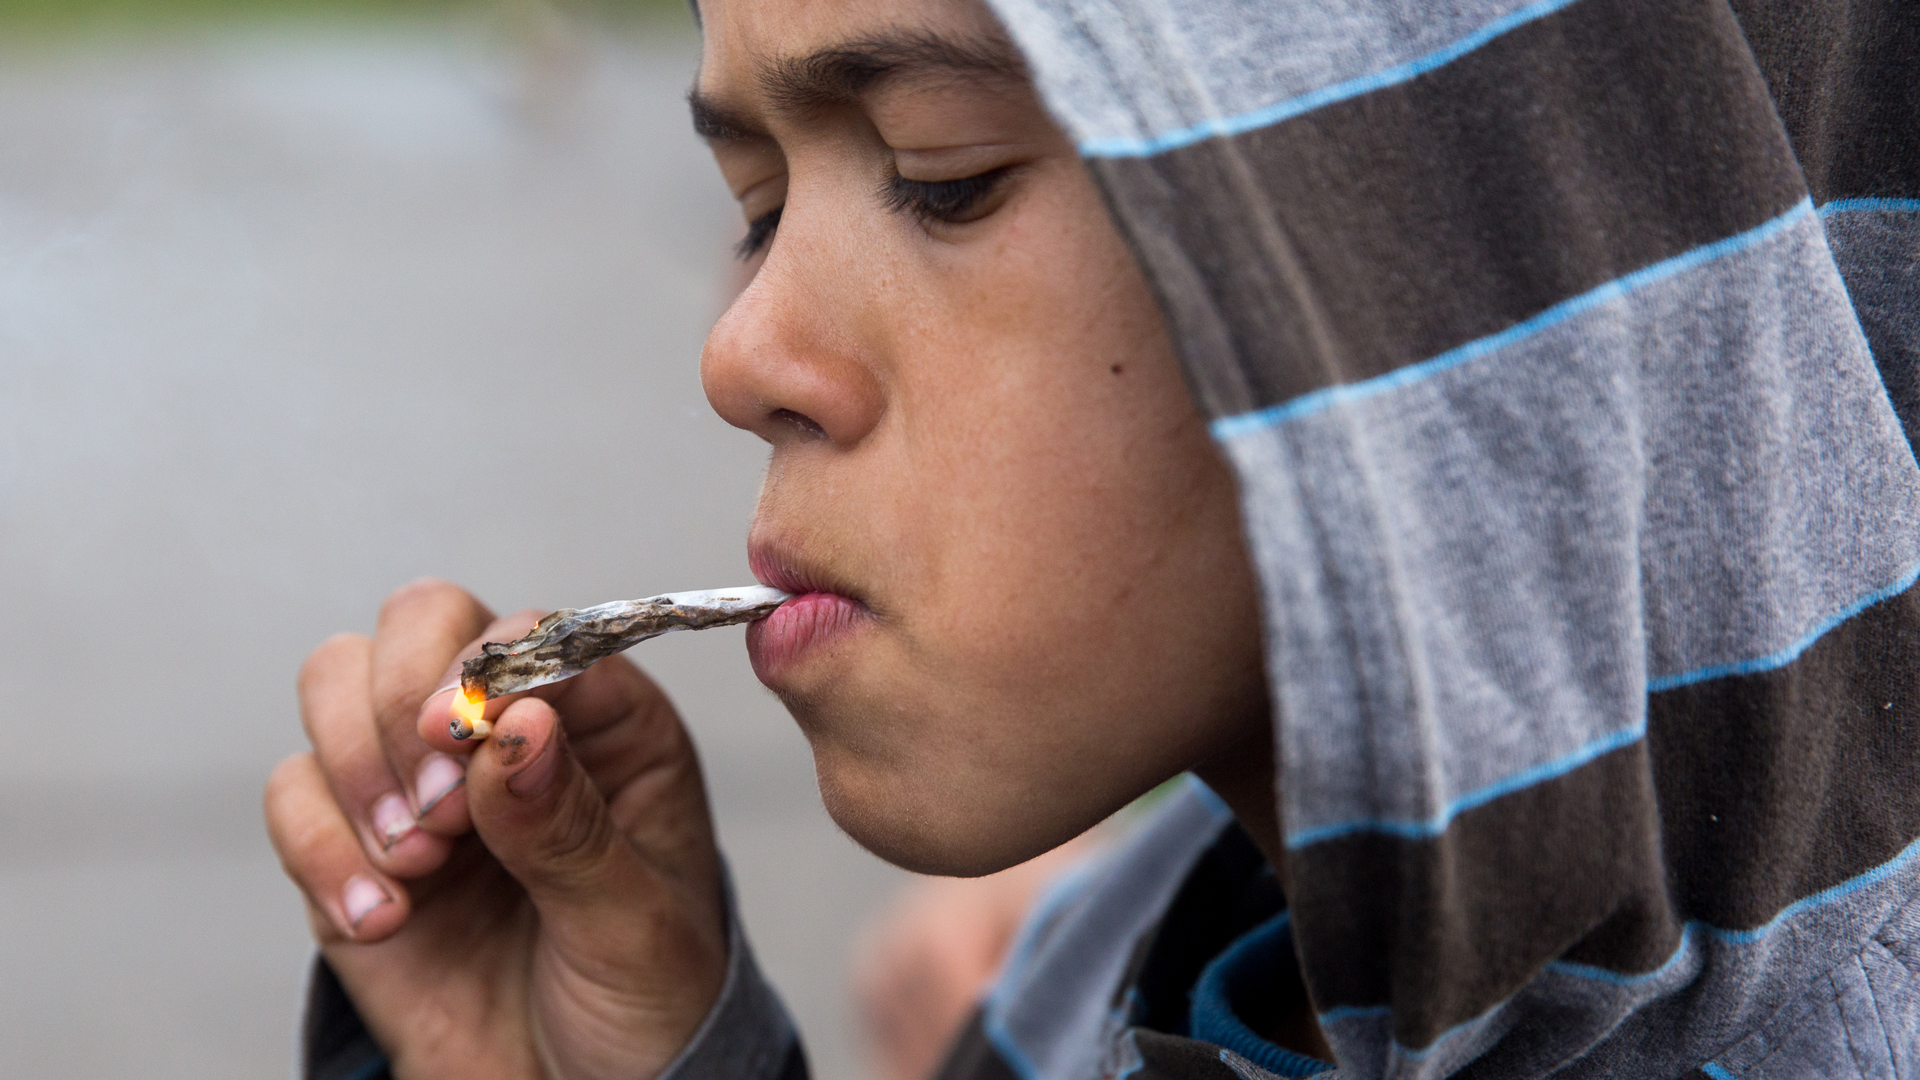 A primary school age Roma boy lights a handrolled cigarette. (Photo by Courtney Pedroza)